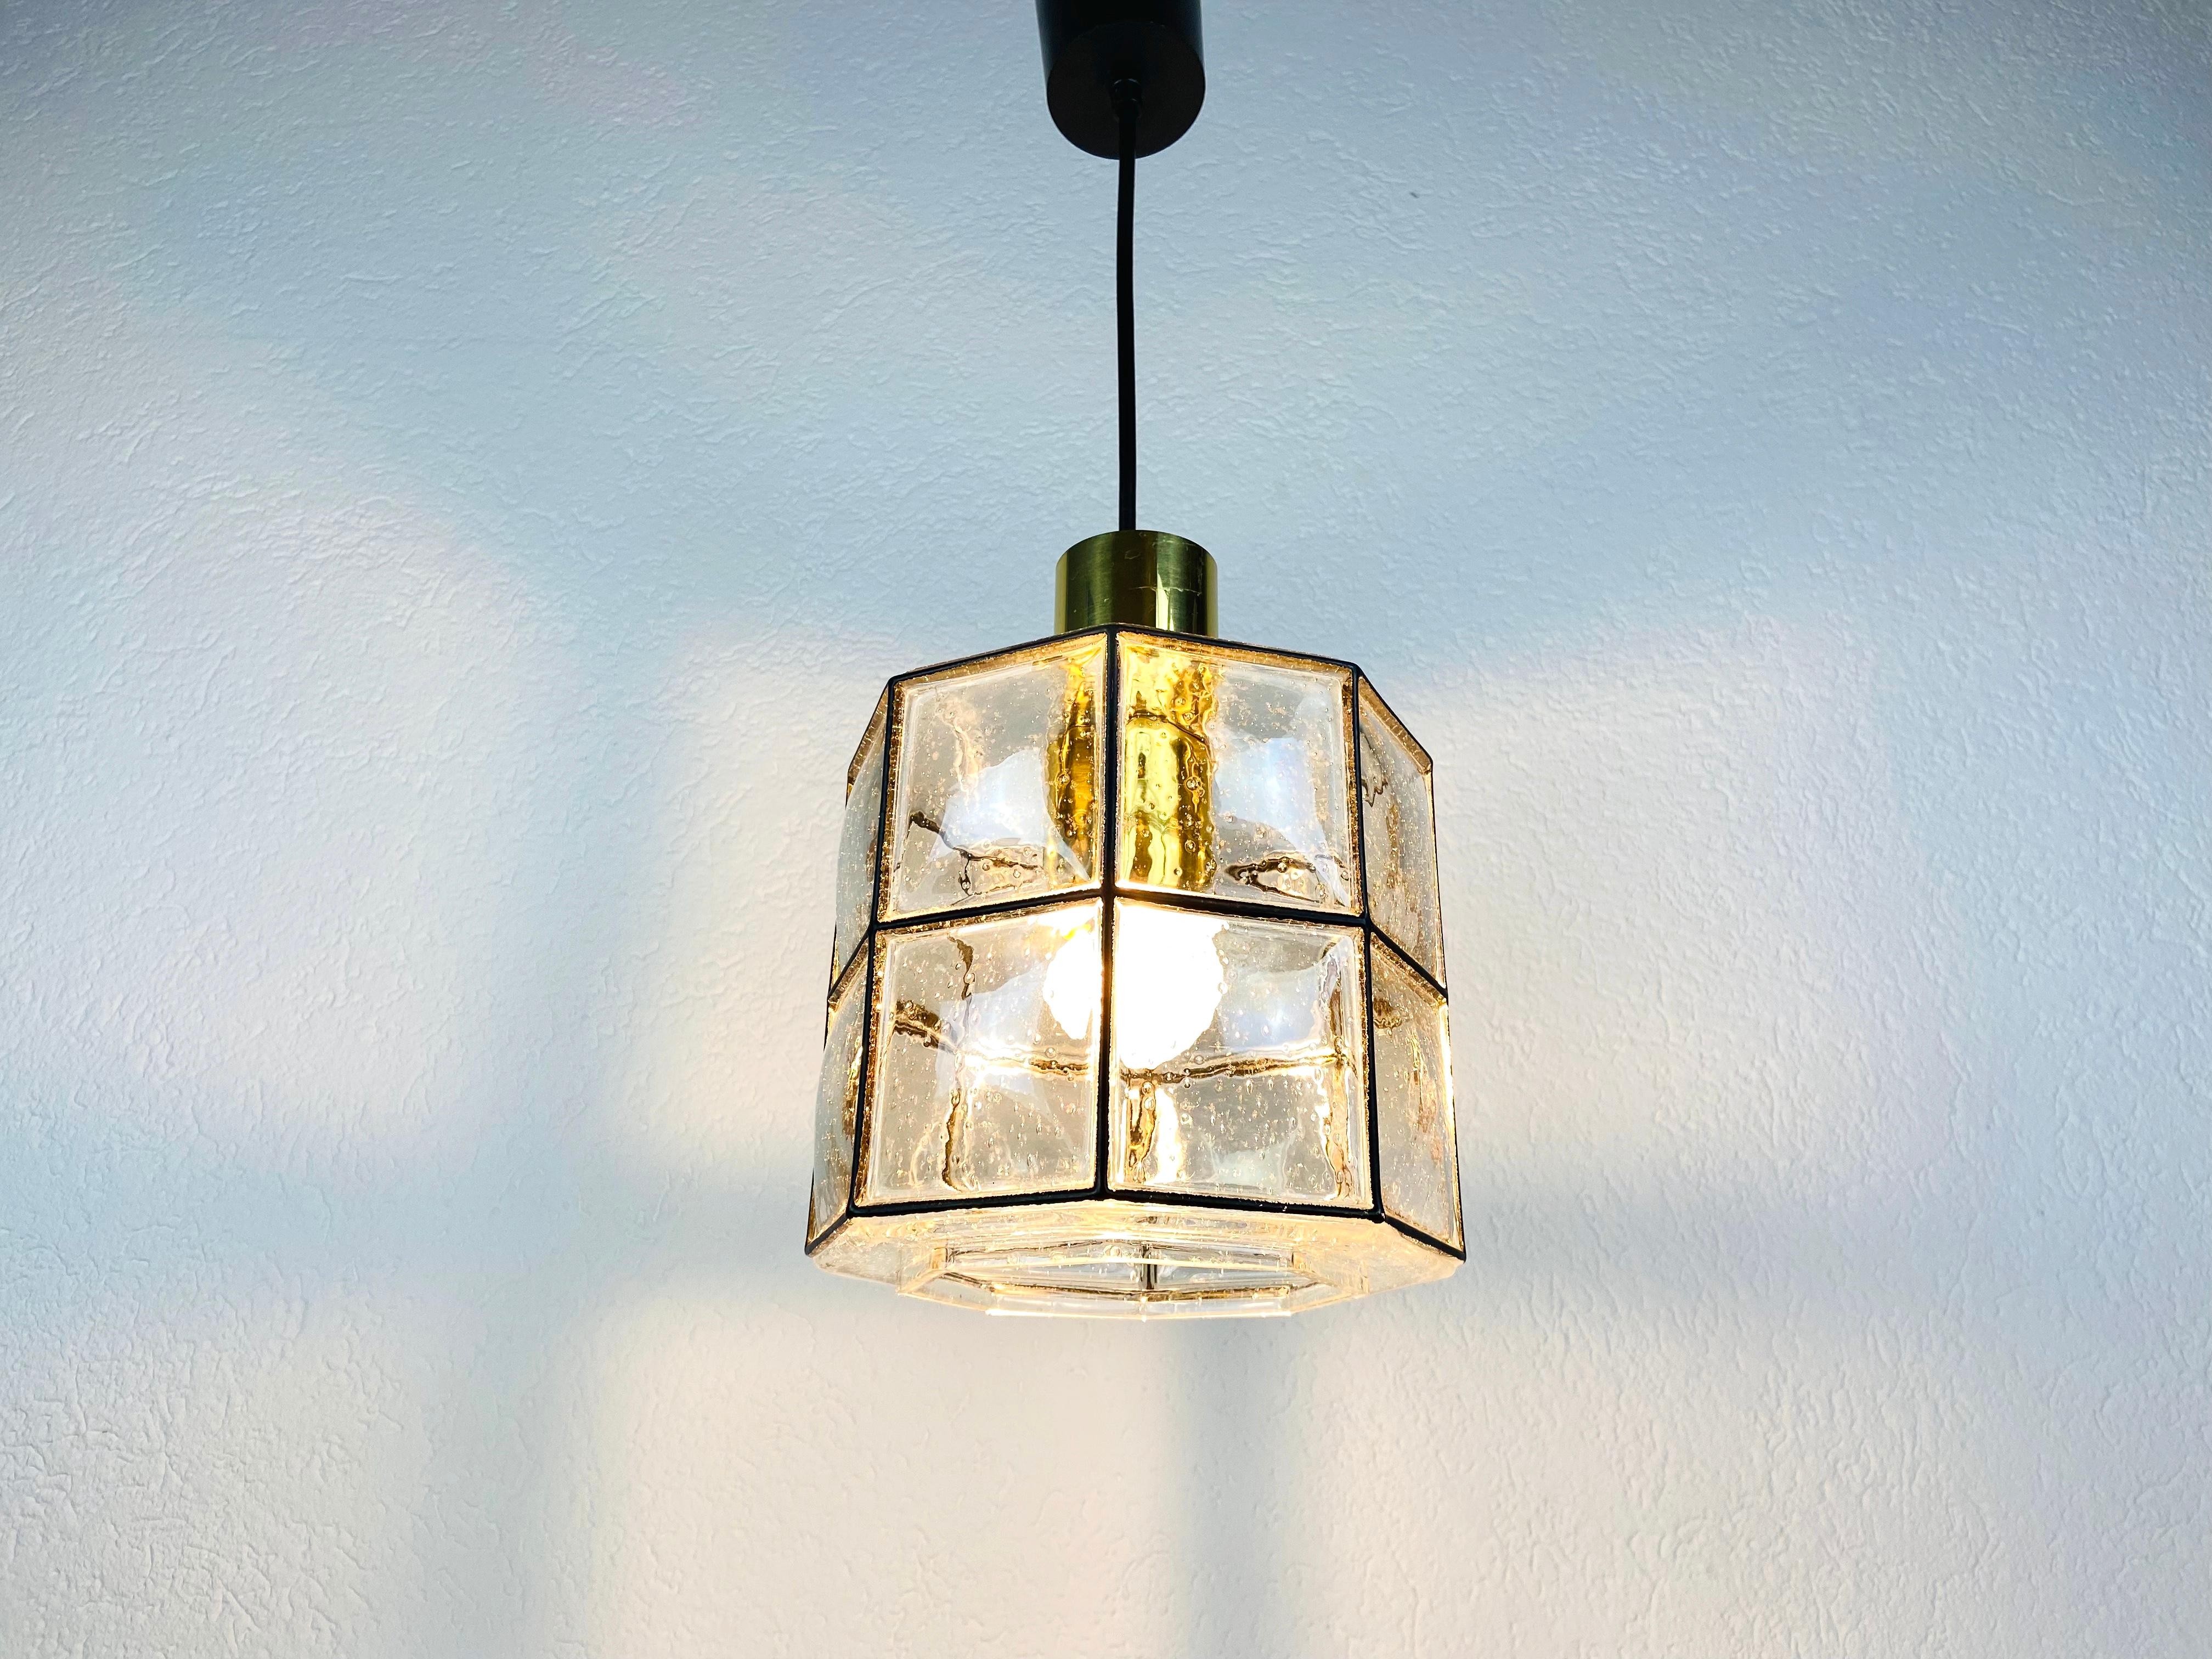 Midcentury Iron and Bubble Glass Pendant Lamp by Glashütte Limburg, 1960s In Good Condition For Sale In Hagenbach, DE